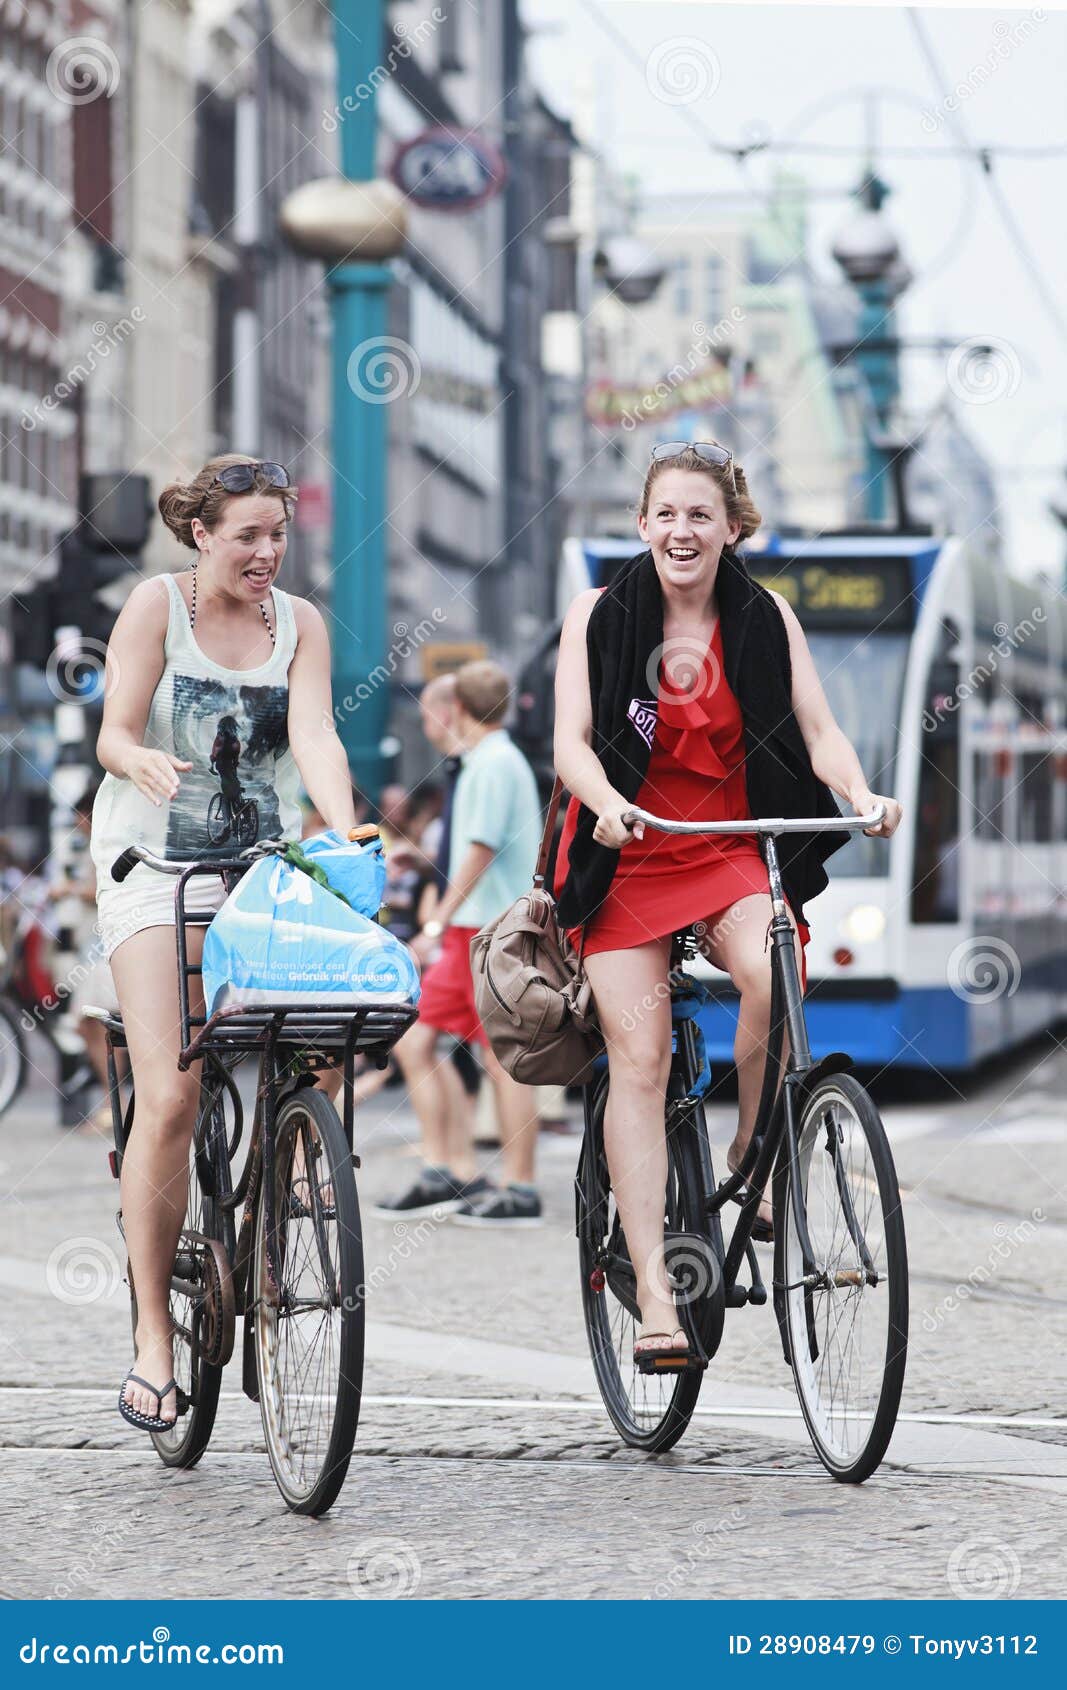 Cheerfull Cycling Girls In Amsterdam Editorial Stock Image - Image